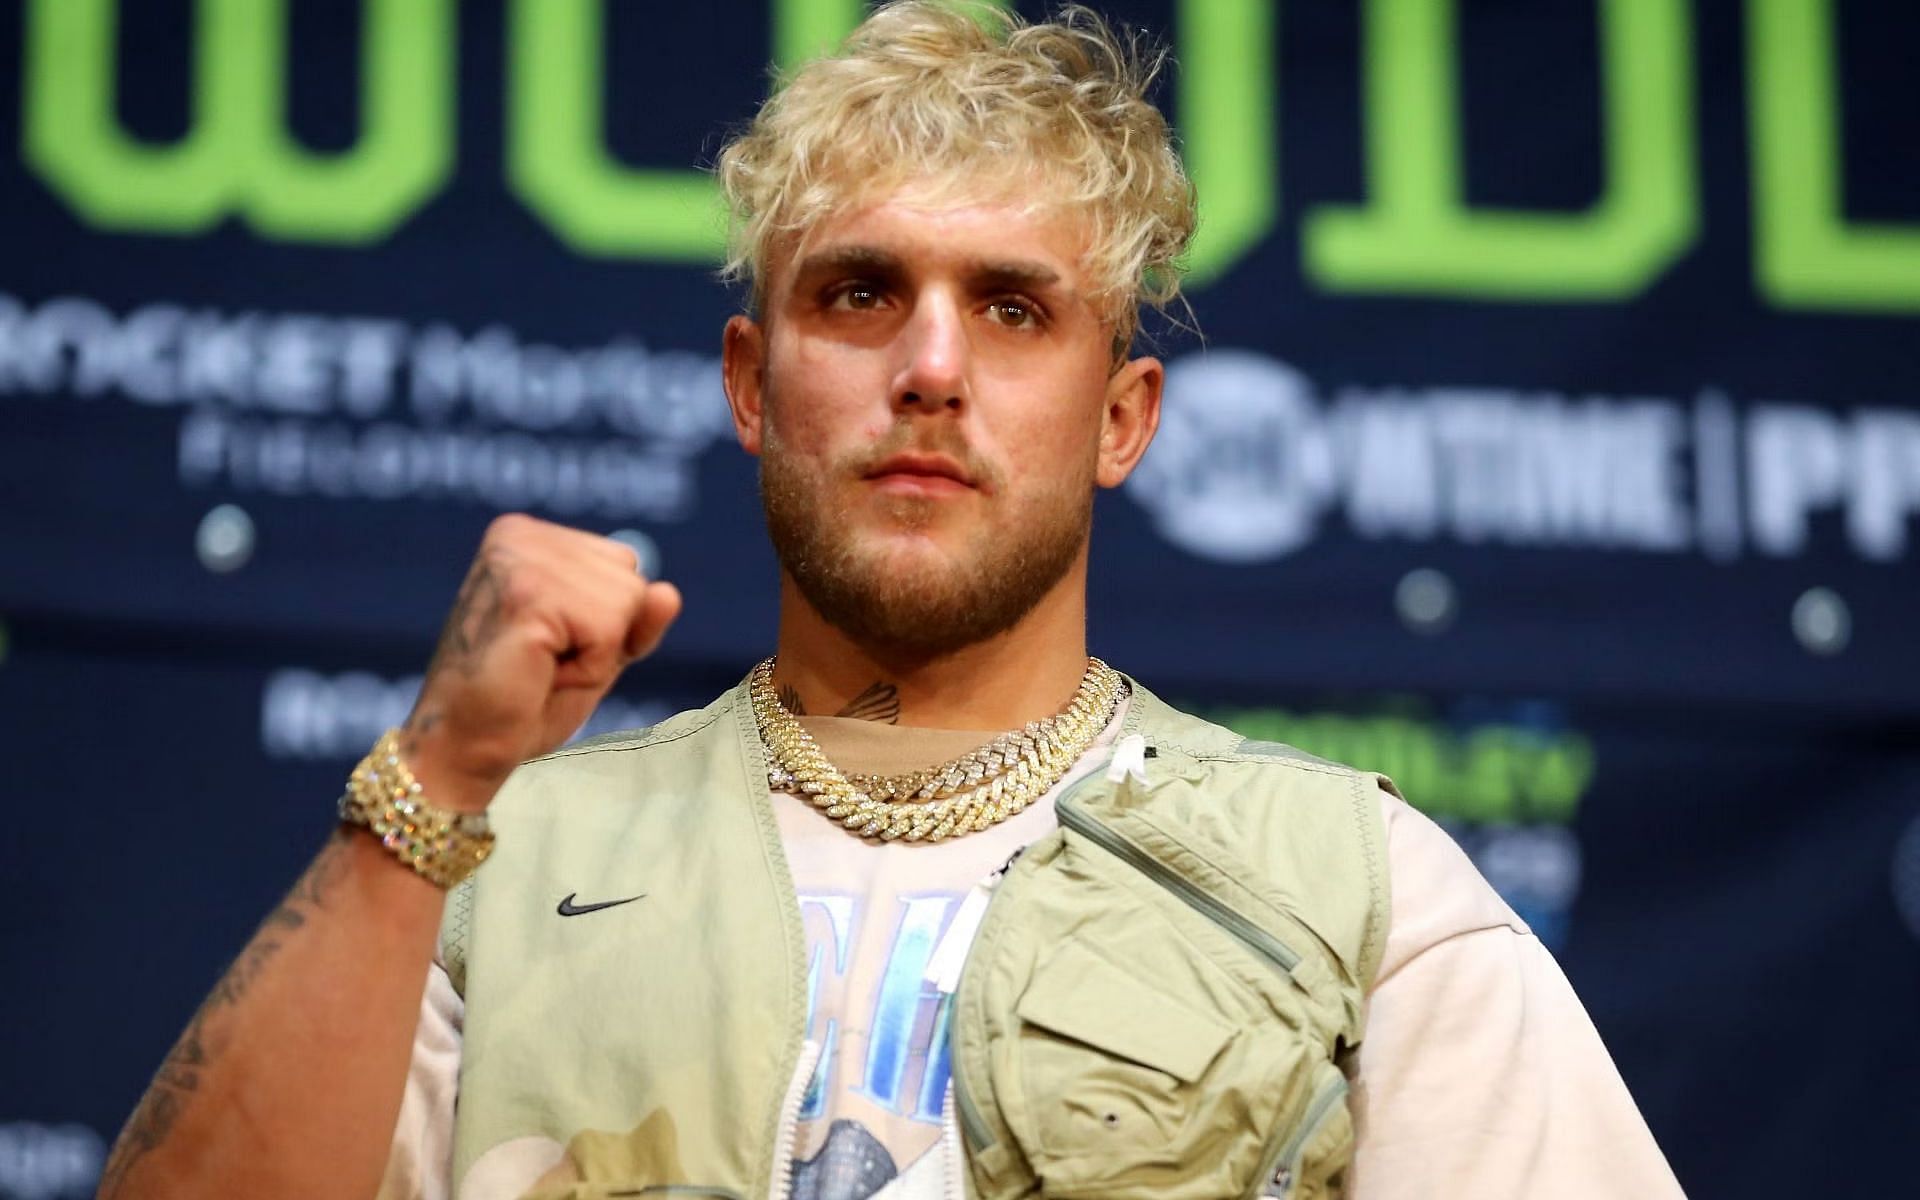 Jake Paul is all set to make his acting debut in the near future [Image Credit: Getty]